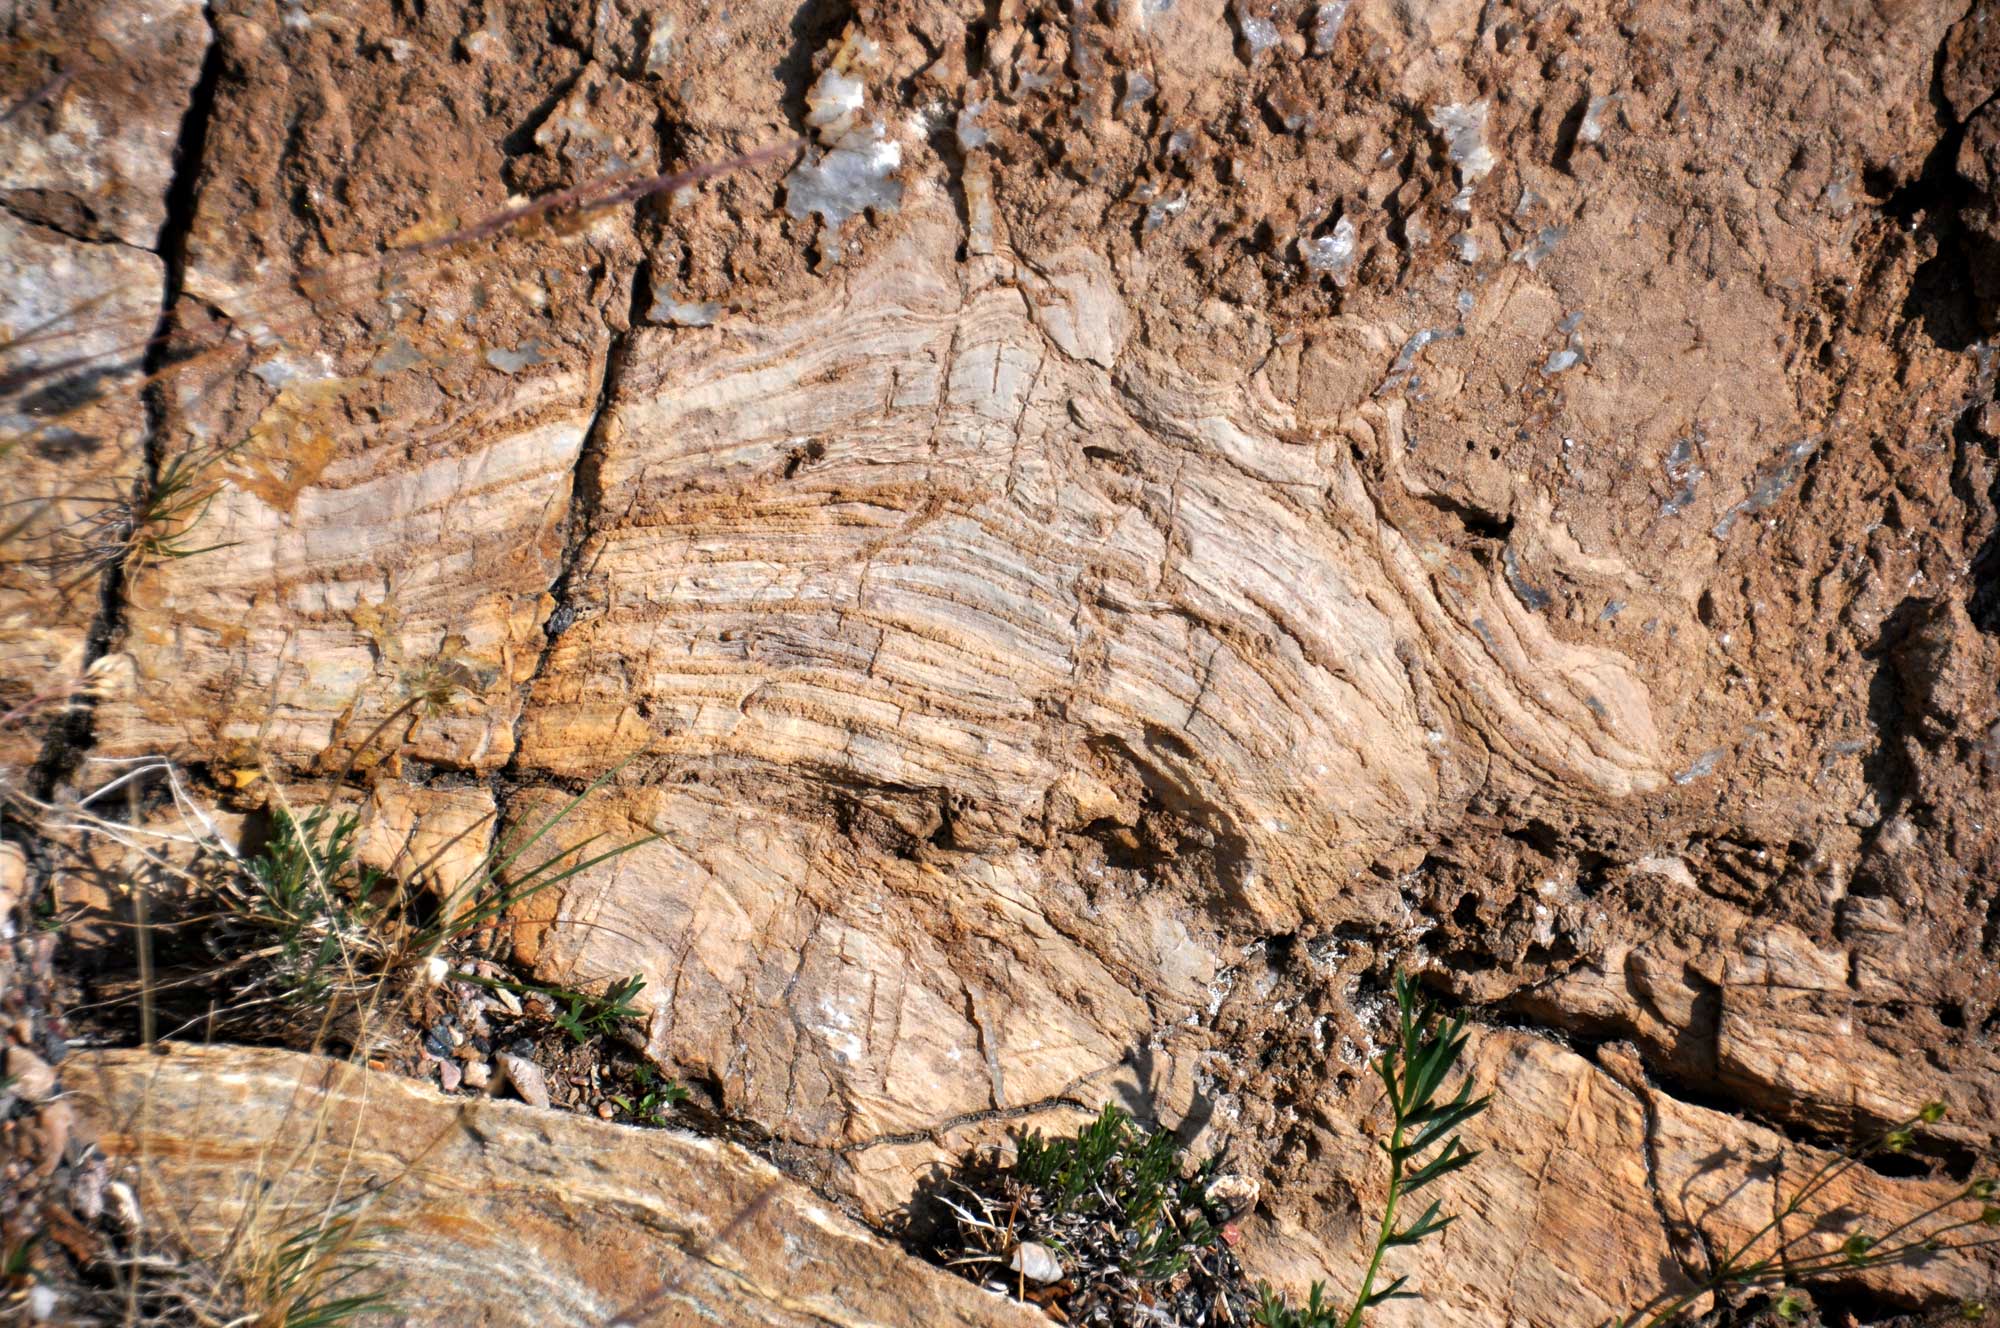 Photograph of stromatolites from Wyoming. Photo shows a slightly domed structure made up of thin, parallel layers exposed on the surface of a rock.